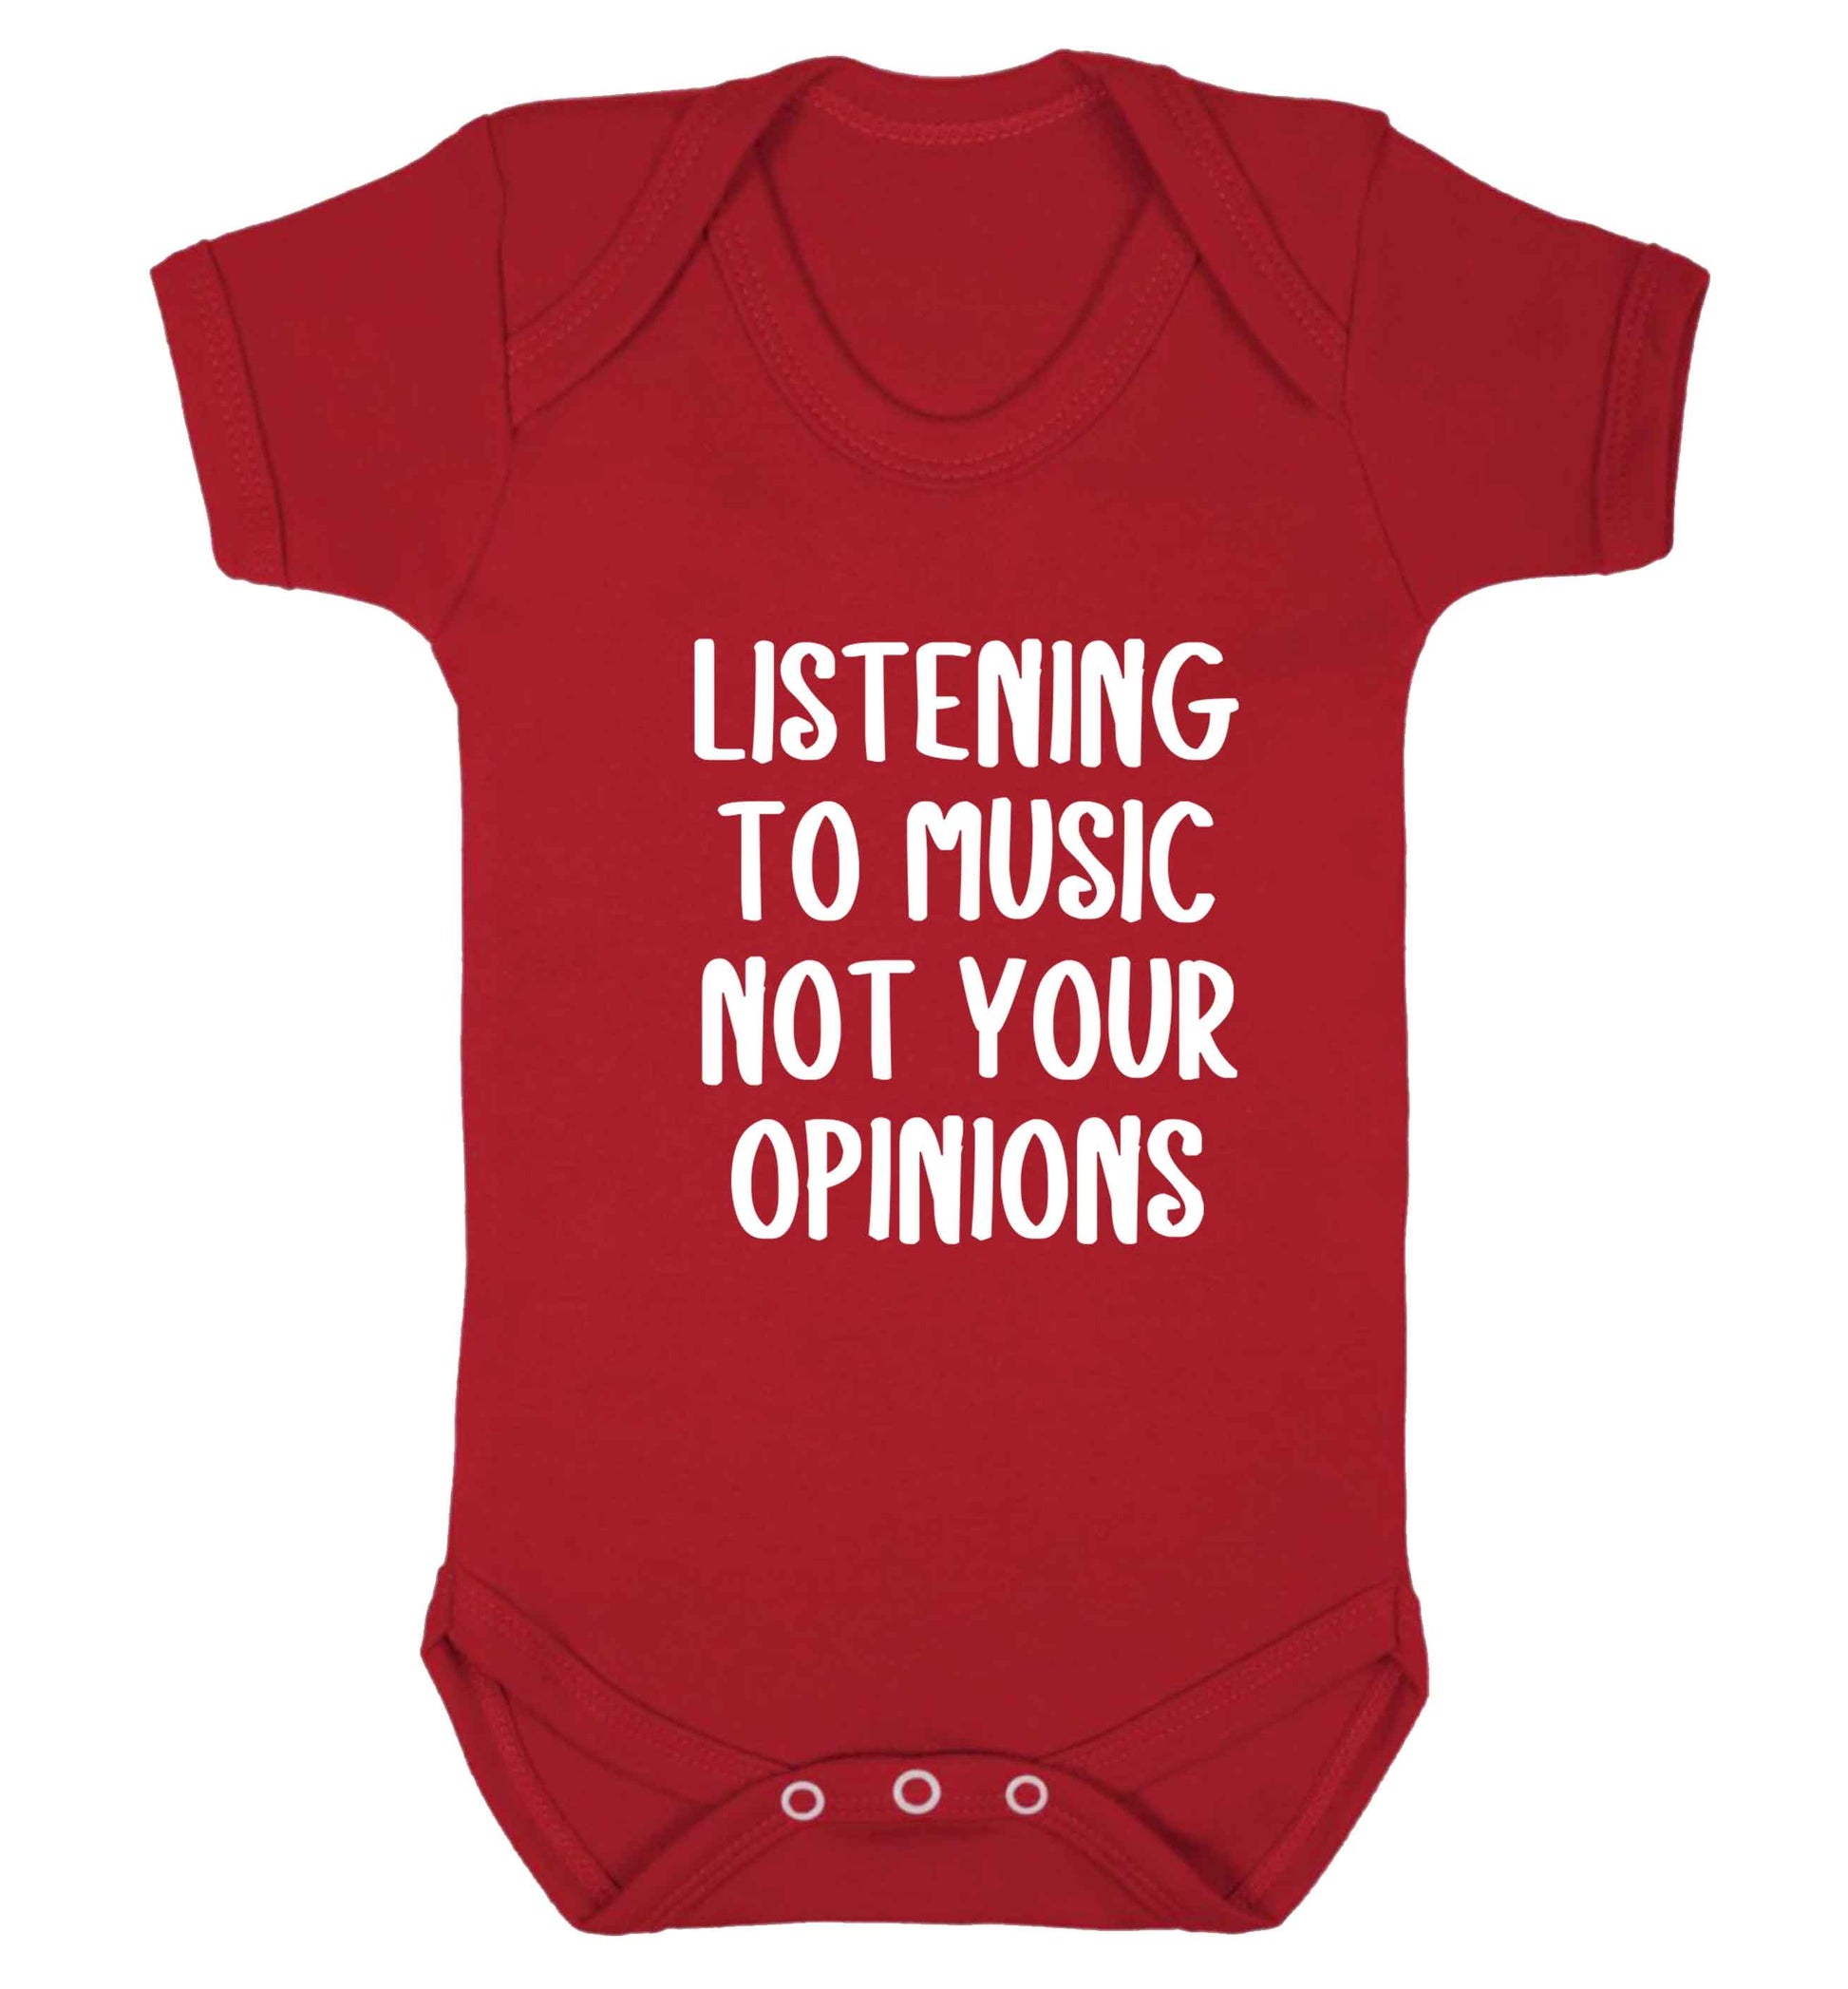 Listening to music not your opinions baby vest red 18-24 months